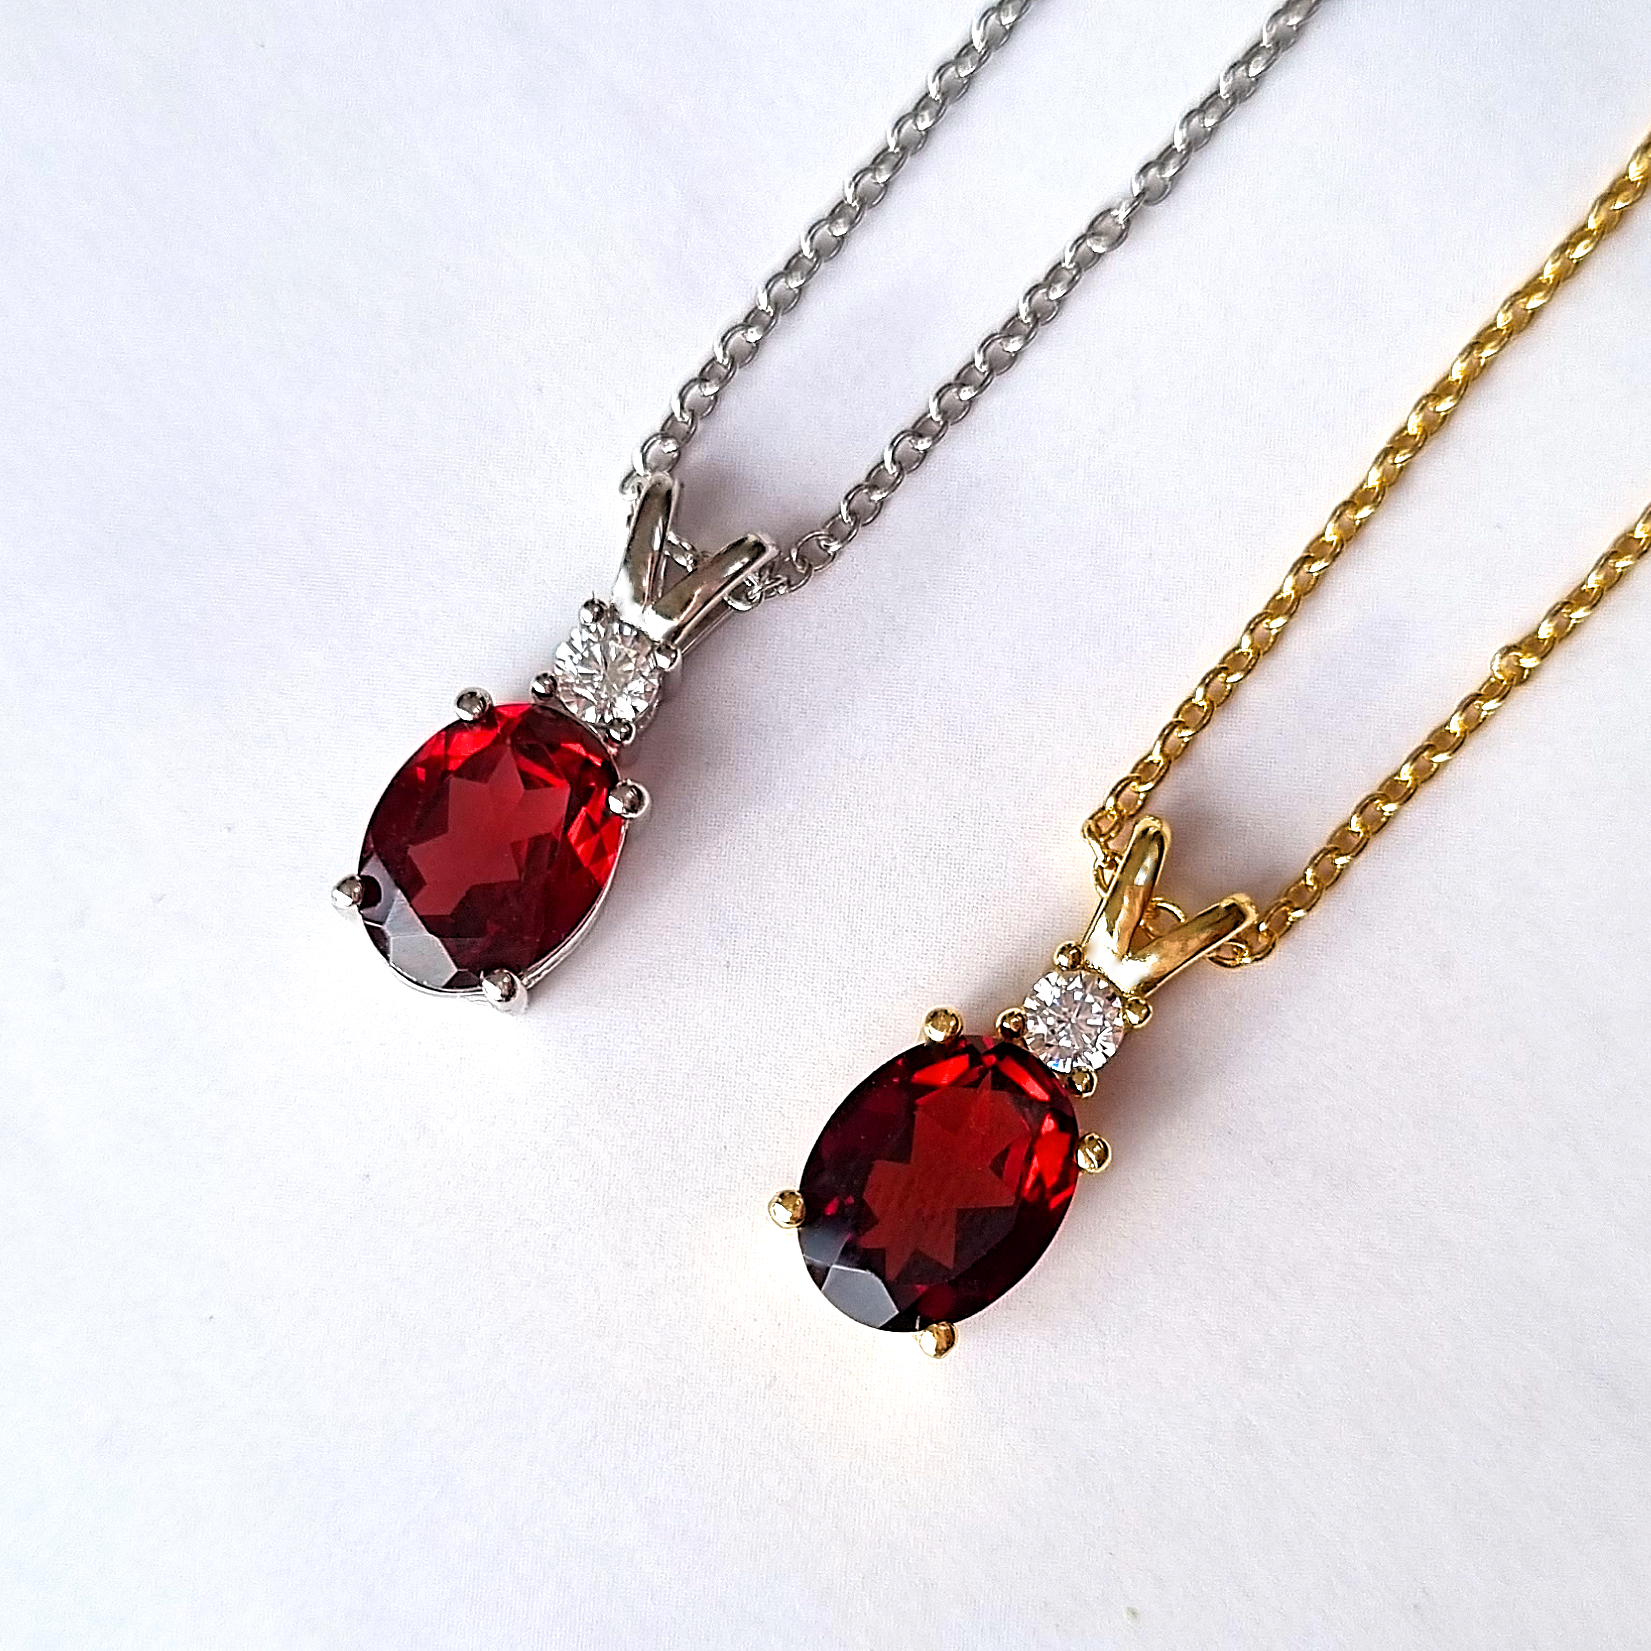 Oval cut garnet and round cut diamond pendant necklace in 18k gold Vermeil for promise ,birthday, mother's day or wedding gift.